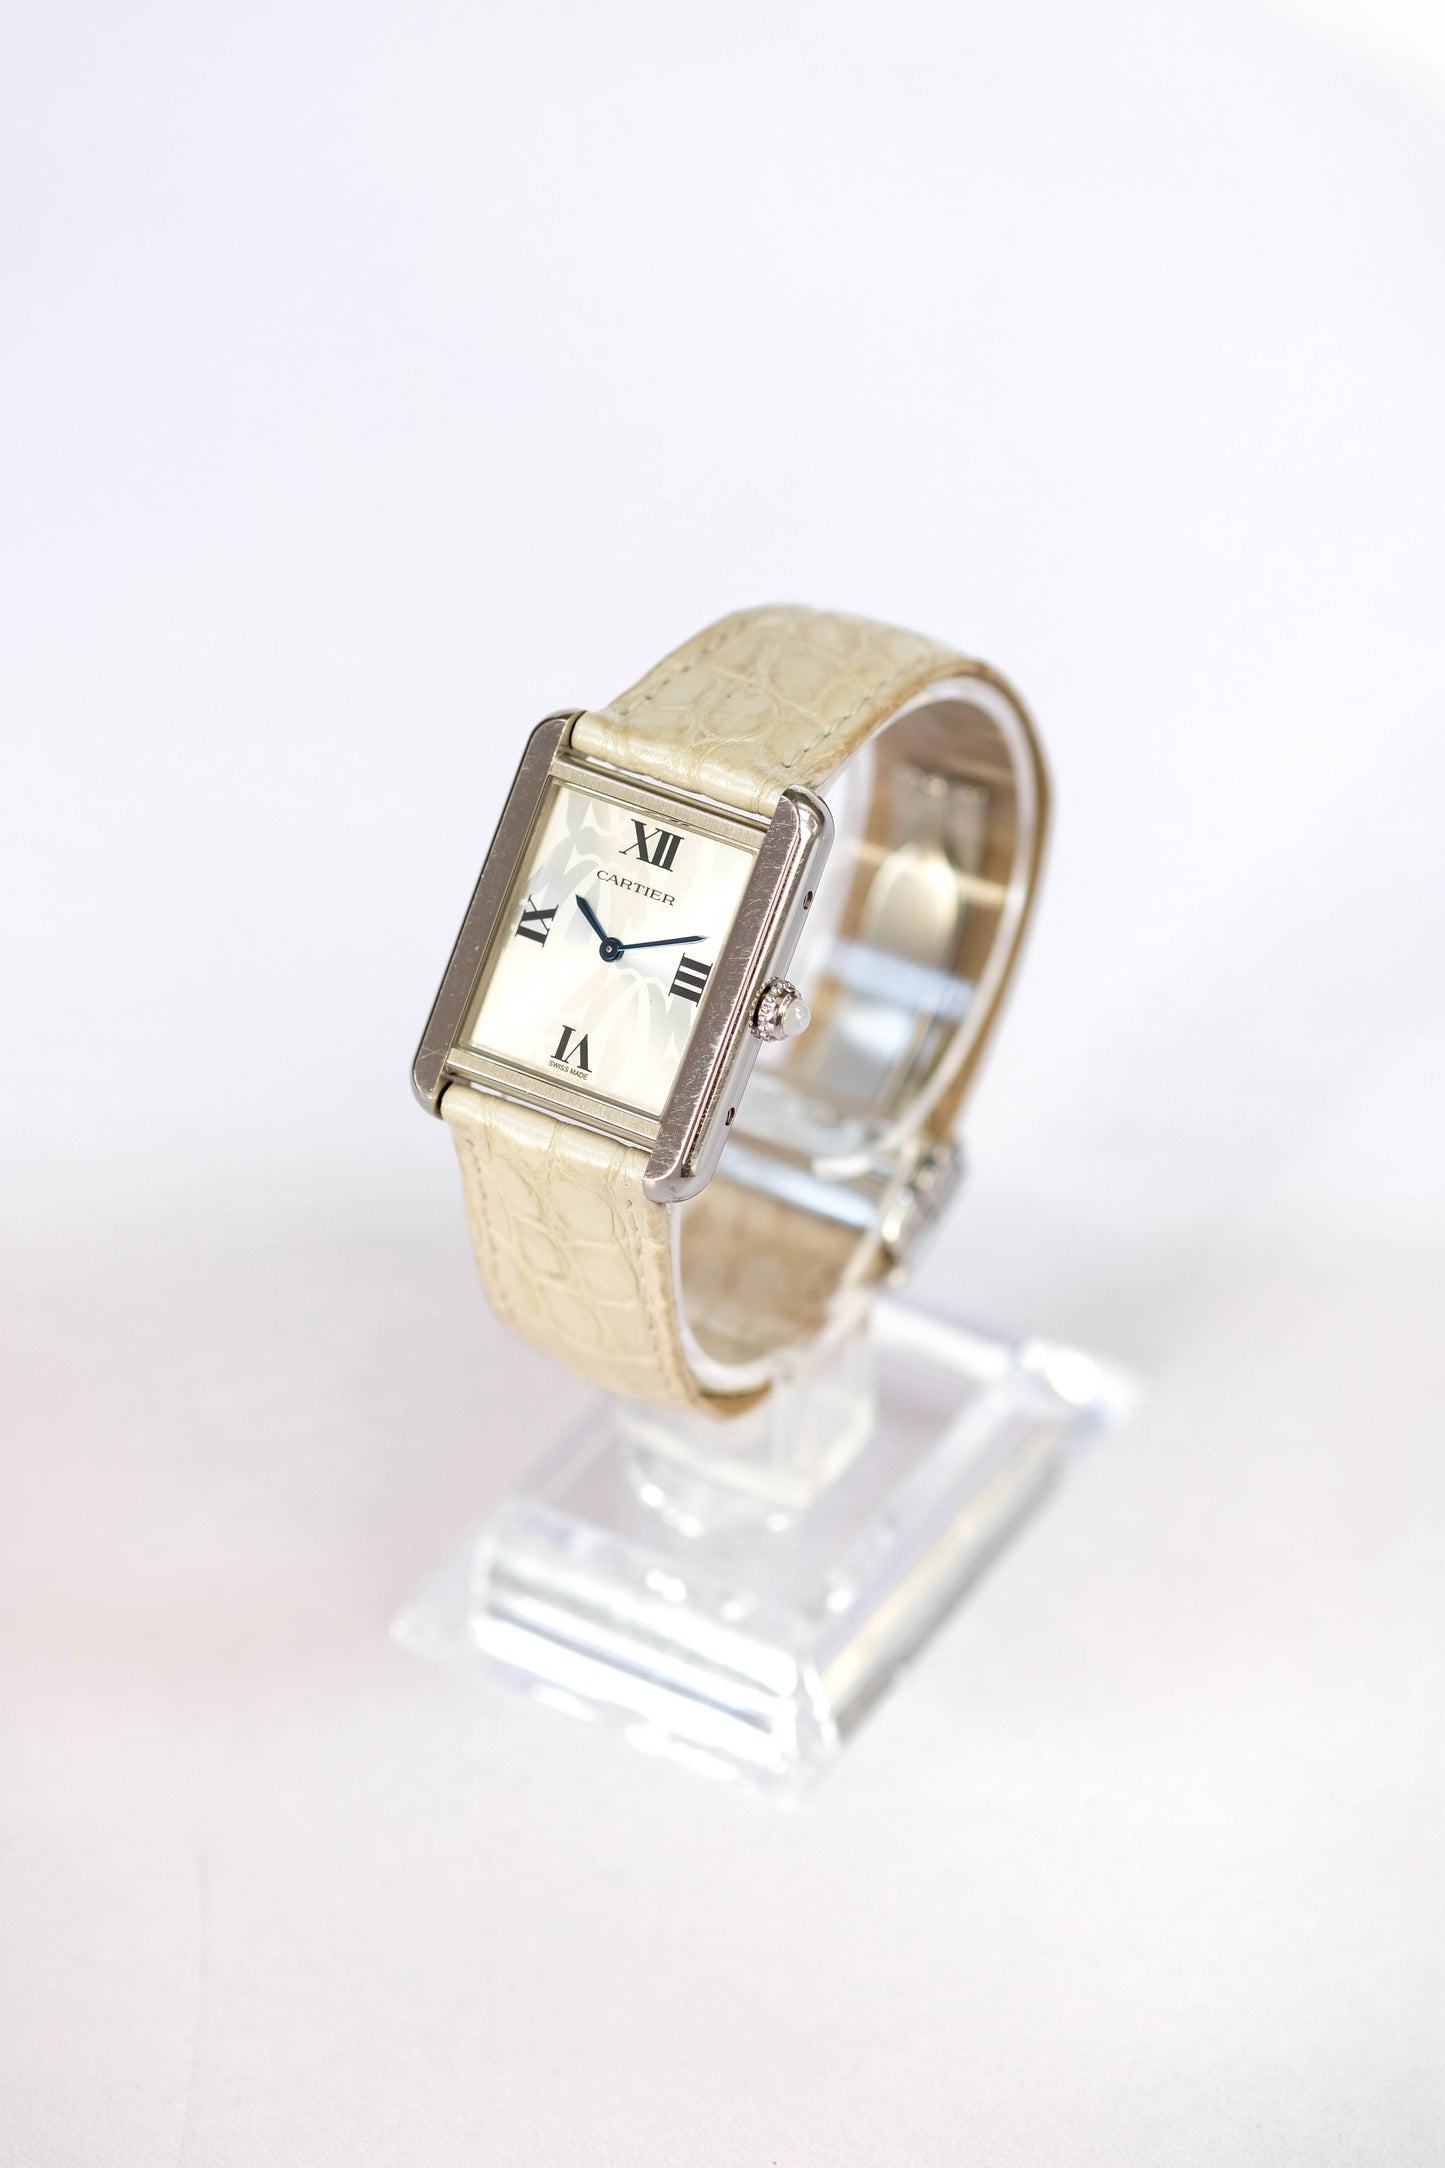 Cartier Tank Solo "signed" - full set